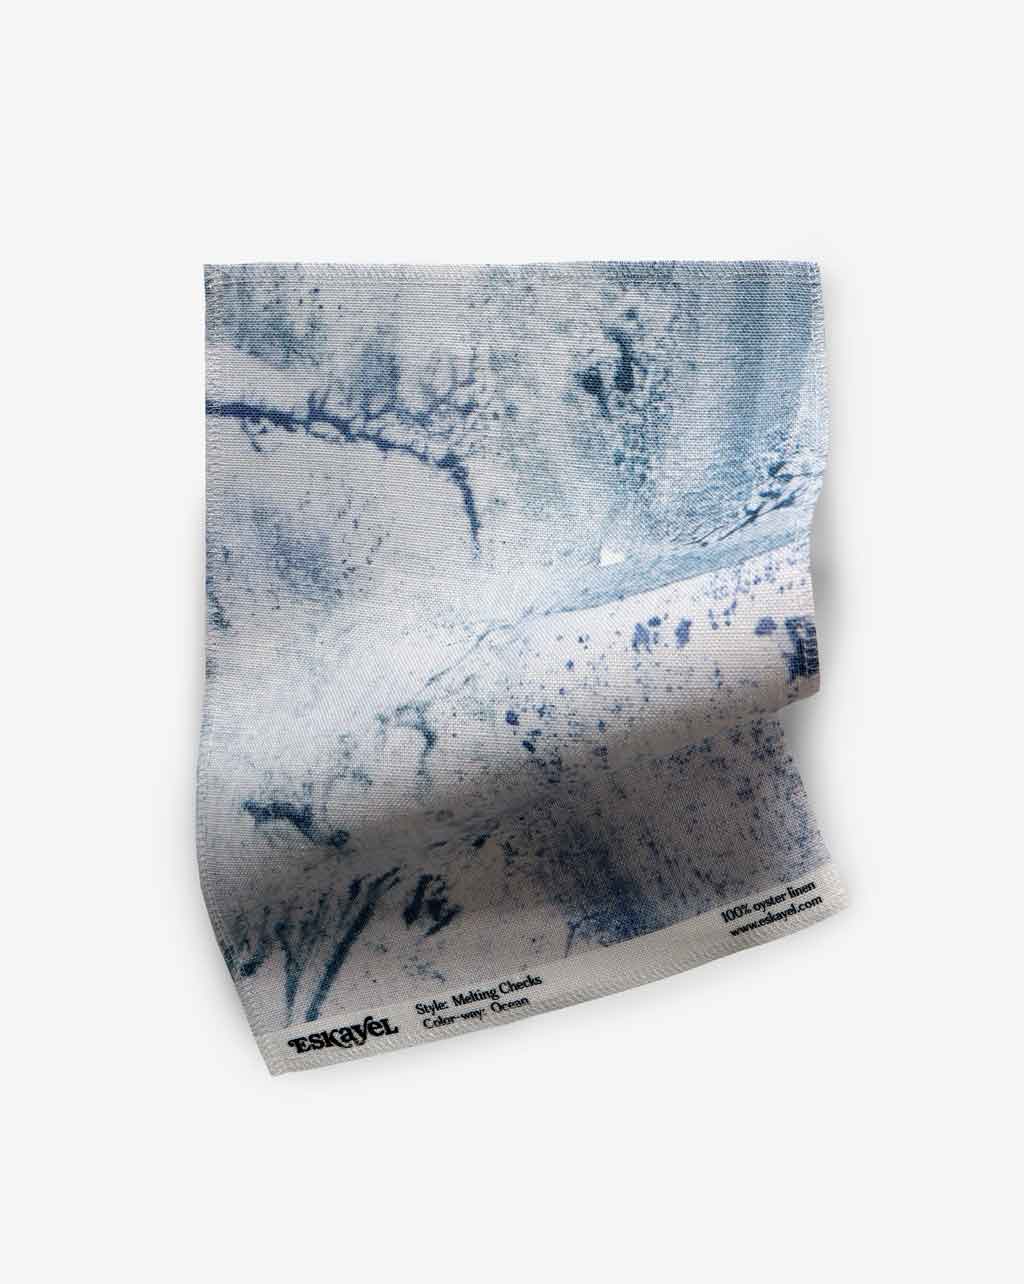 A Melting Checks Fabric Sample Ocean piece of paper with a blue and white pattern on it